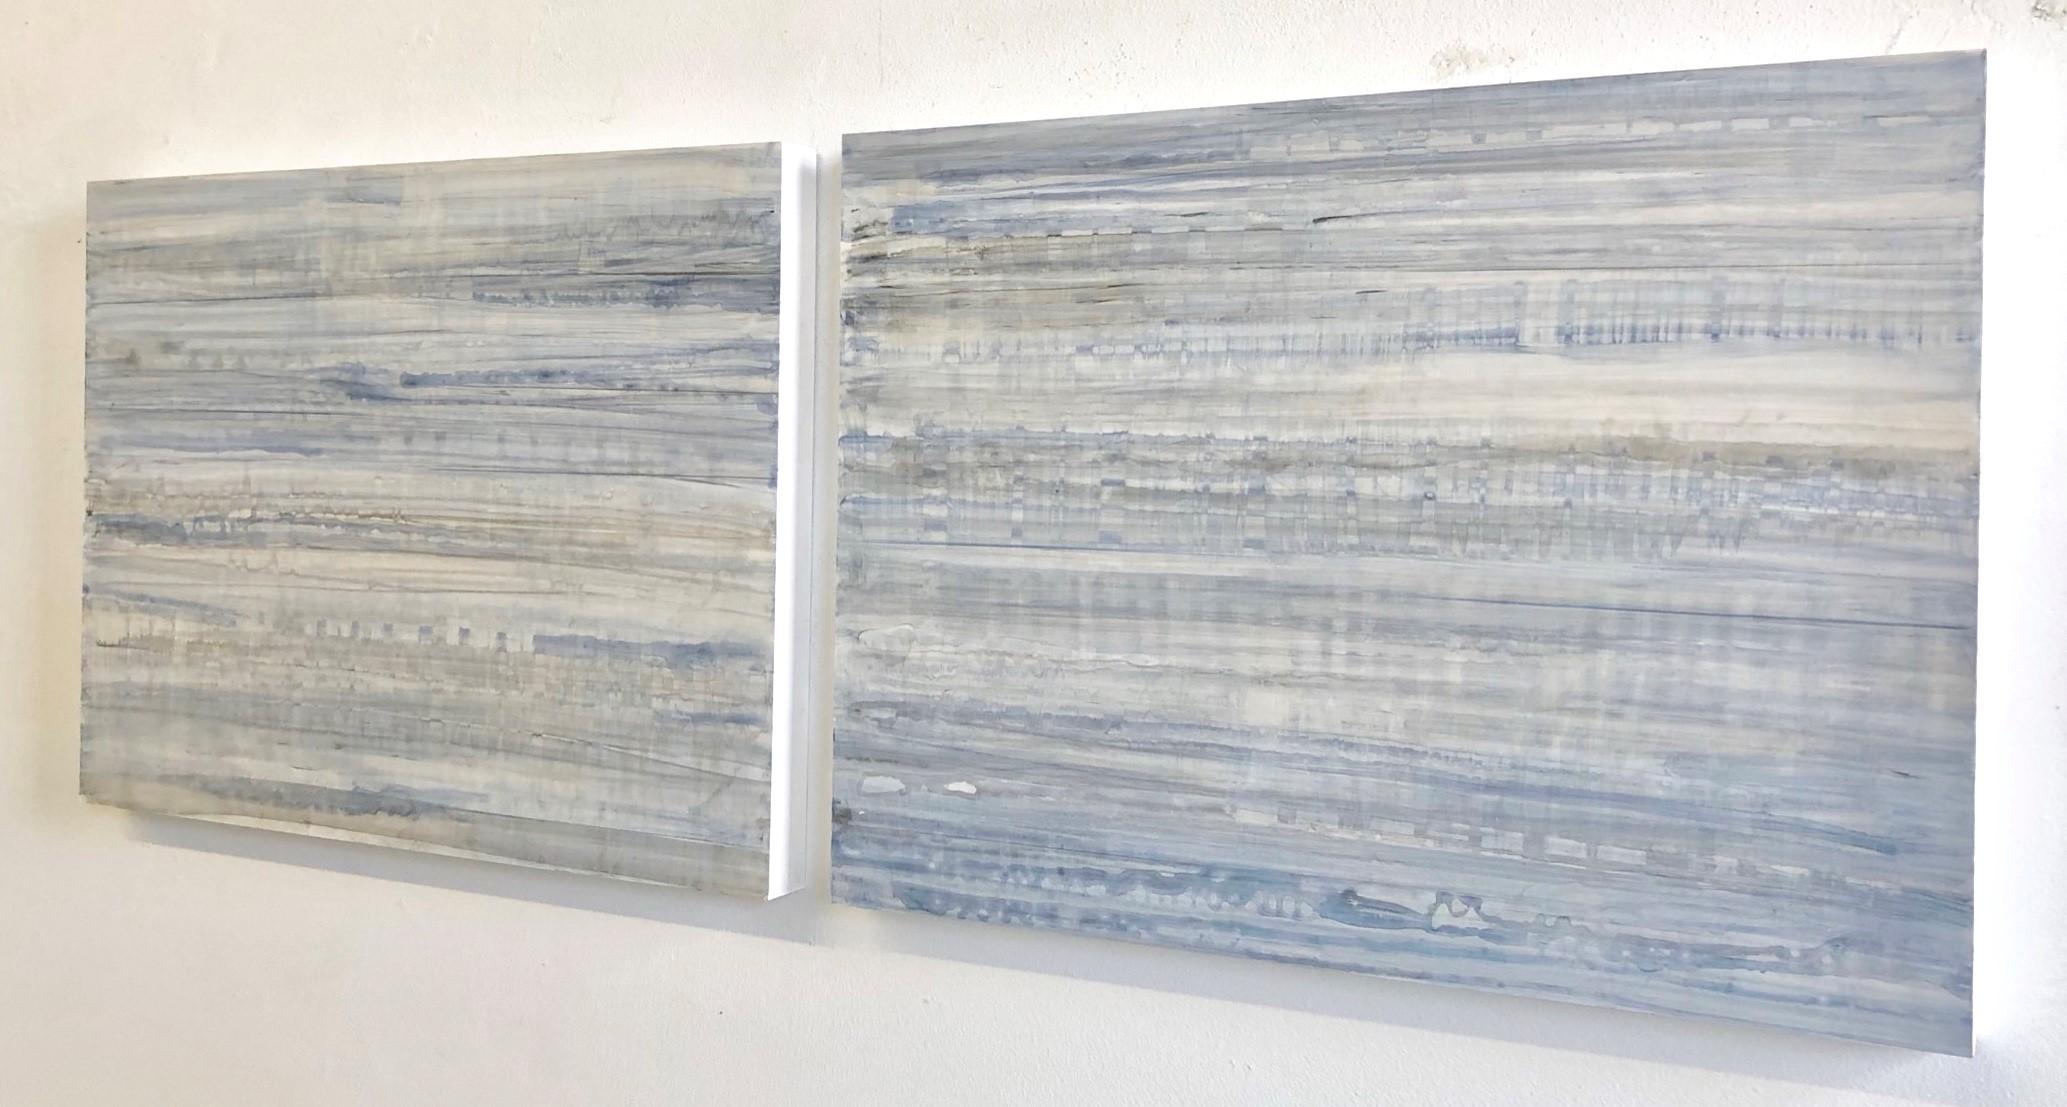 Nature-Inspired Minimalist Abstract Color Field painting on two wood panels in shades of light, icy blue, white and grey 
Acrylic on two wood panel, Each panel is 18 x 24 x 1.5 inches
Suggested installation is 1-2 inches between each panel
Panels